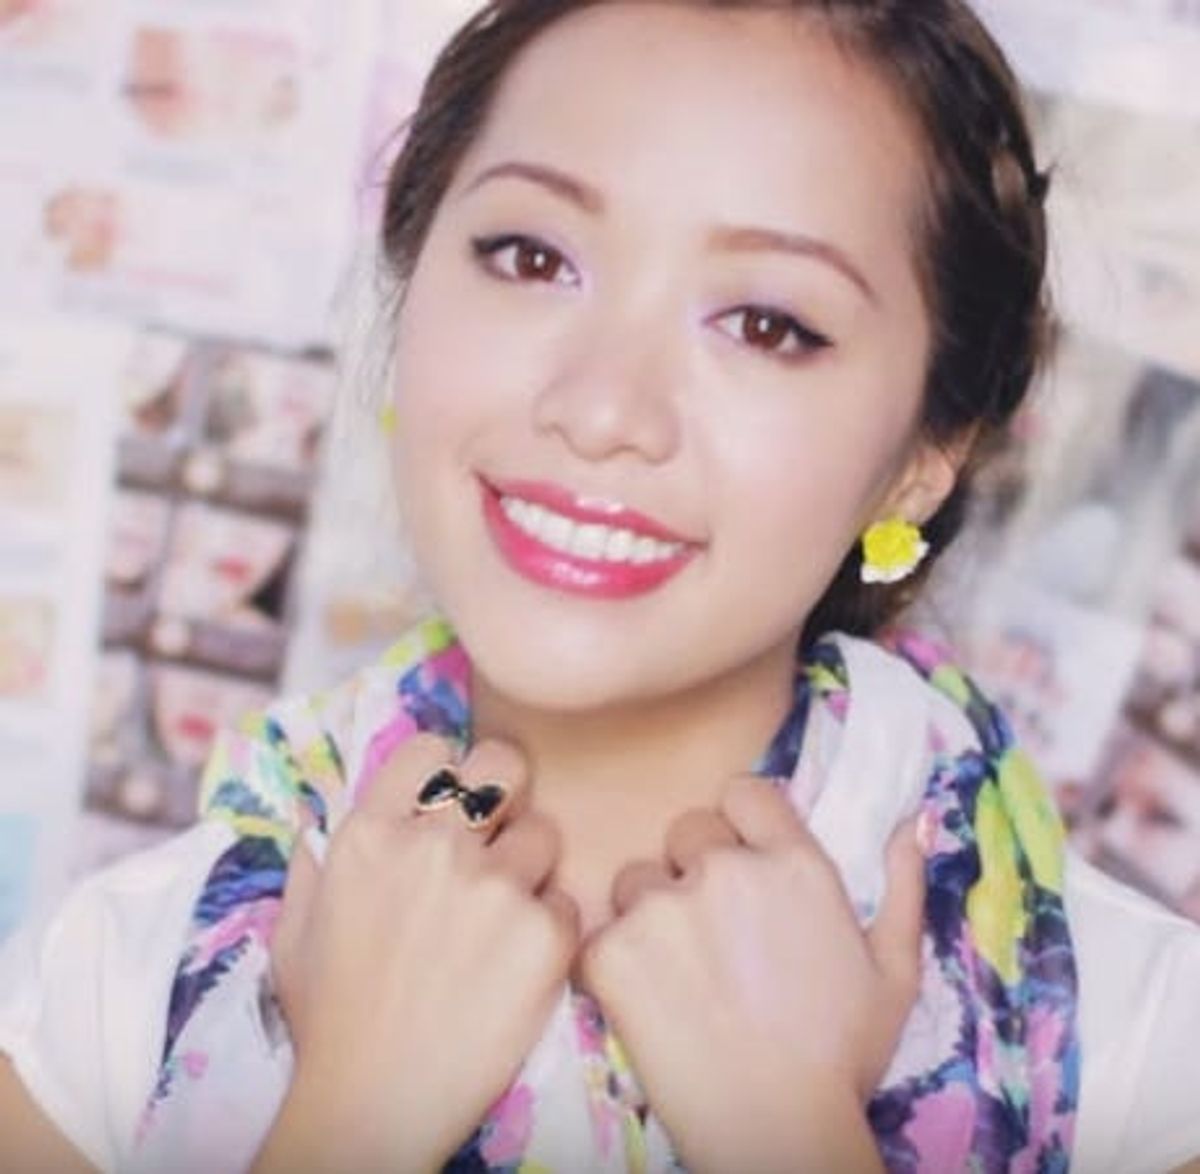 10 Must-Watch YouTube Vids to Nail Every Back-to School Look